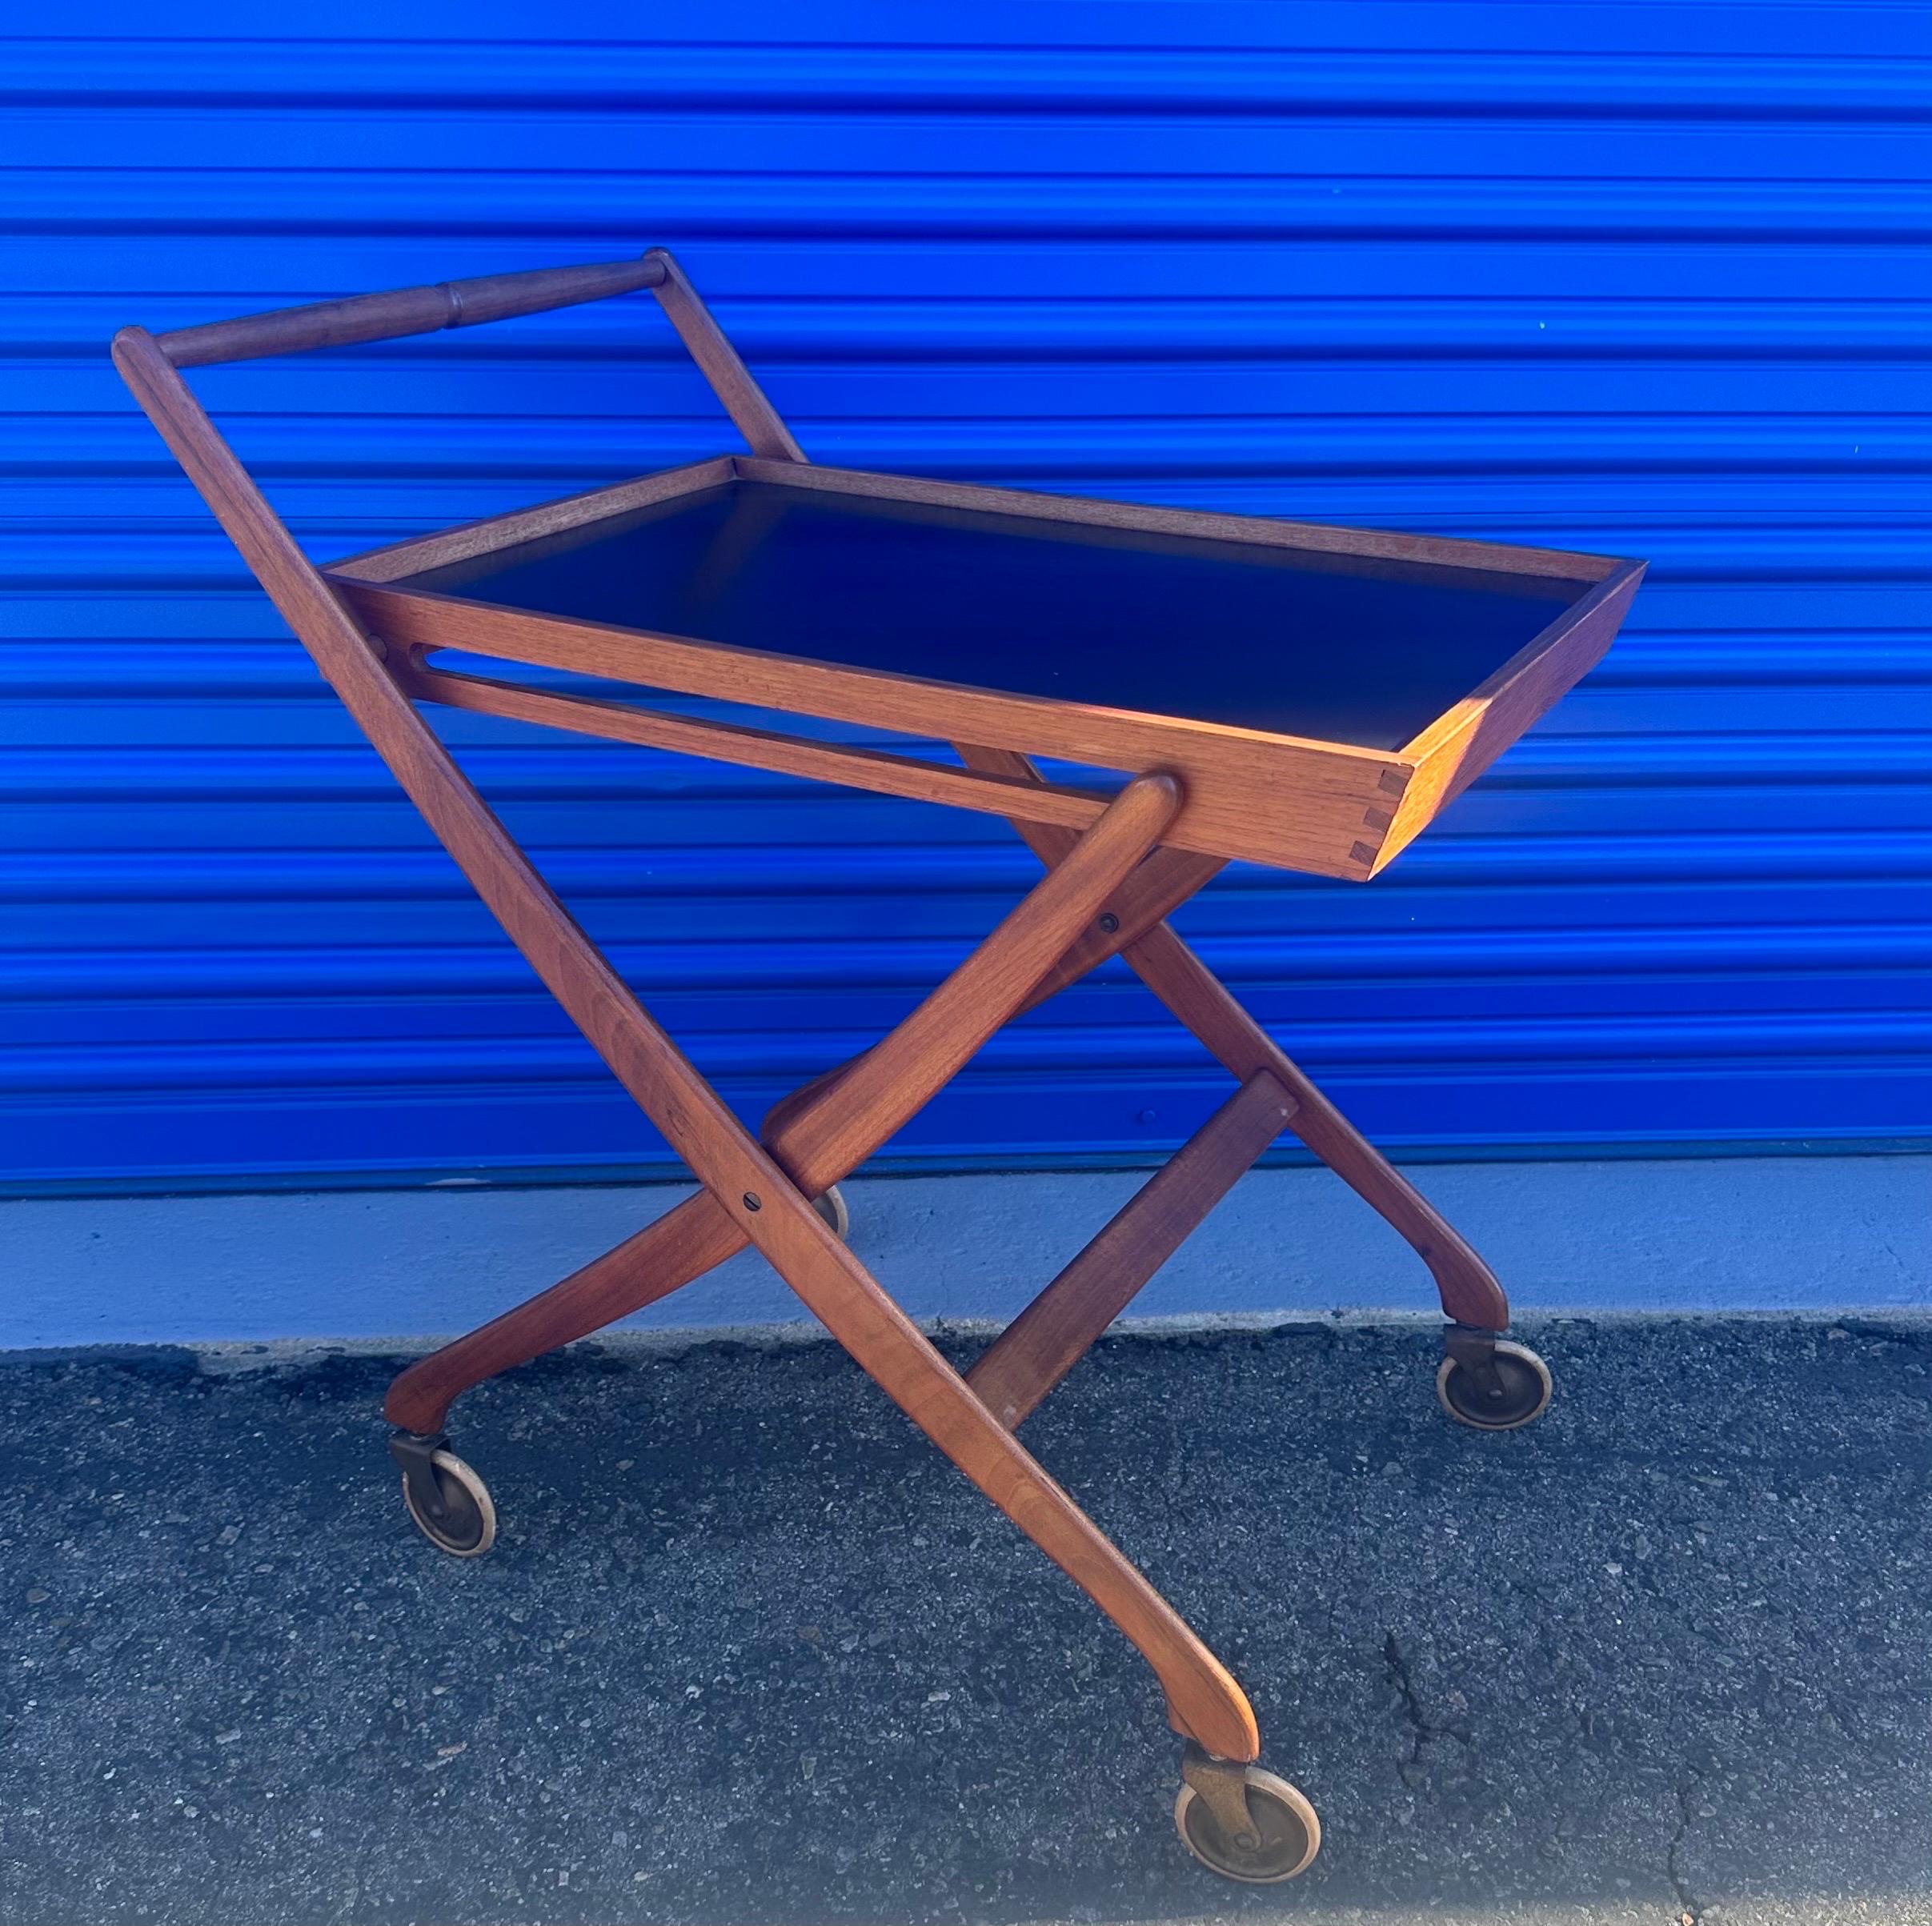 A very nice and functional Danish modern folding teak bar cart / serving trolley, circa 1960s.  Elegant and simply designed Danish bar cart on gliding wheels. Beautifully detailed wooden dovetailed joints with a black laminate serving tray top.  The